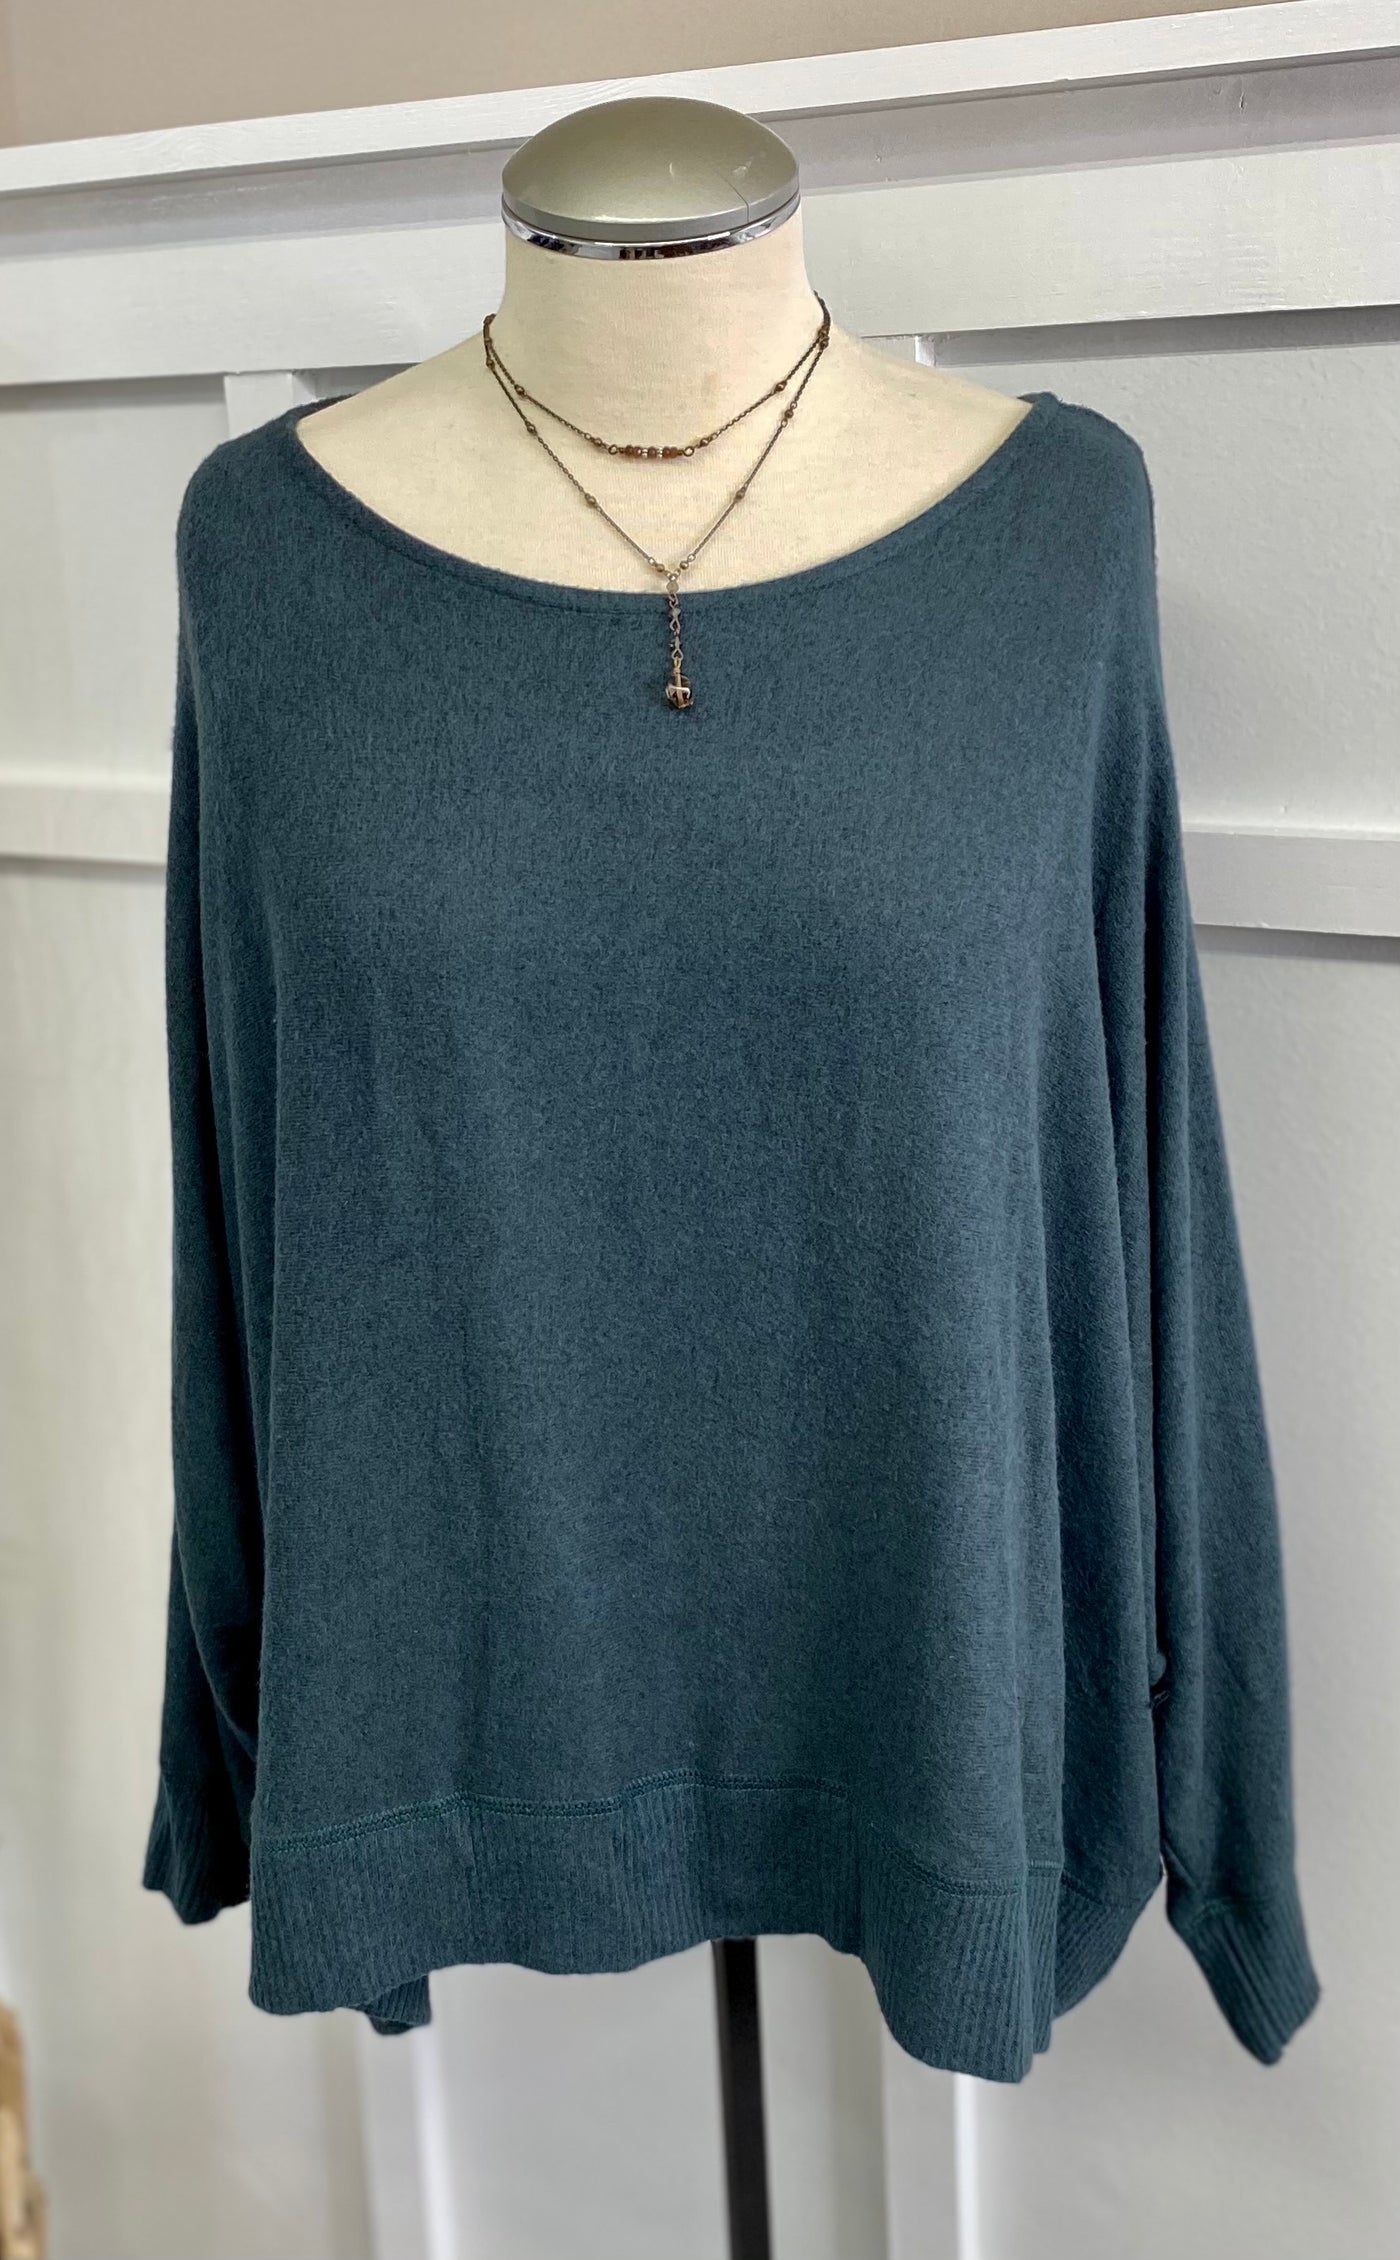 Brushed Knit Dolman Sleeve Top